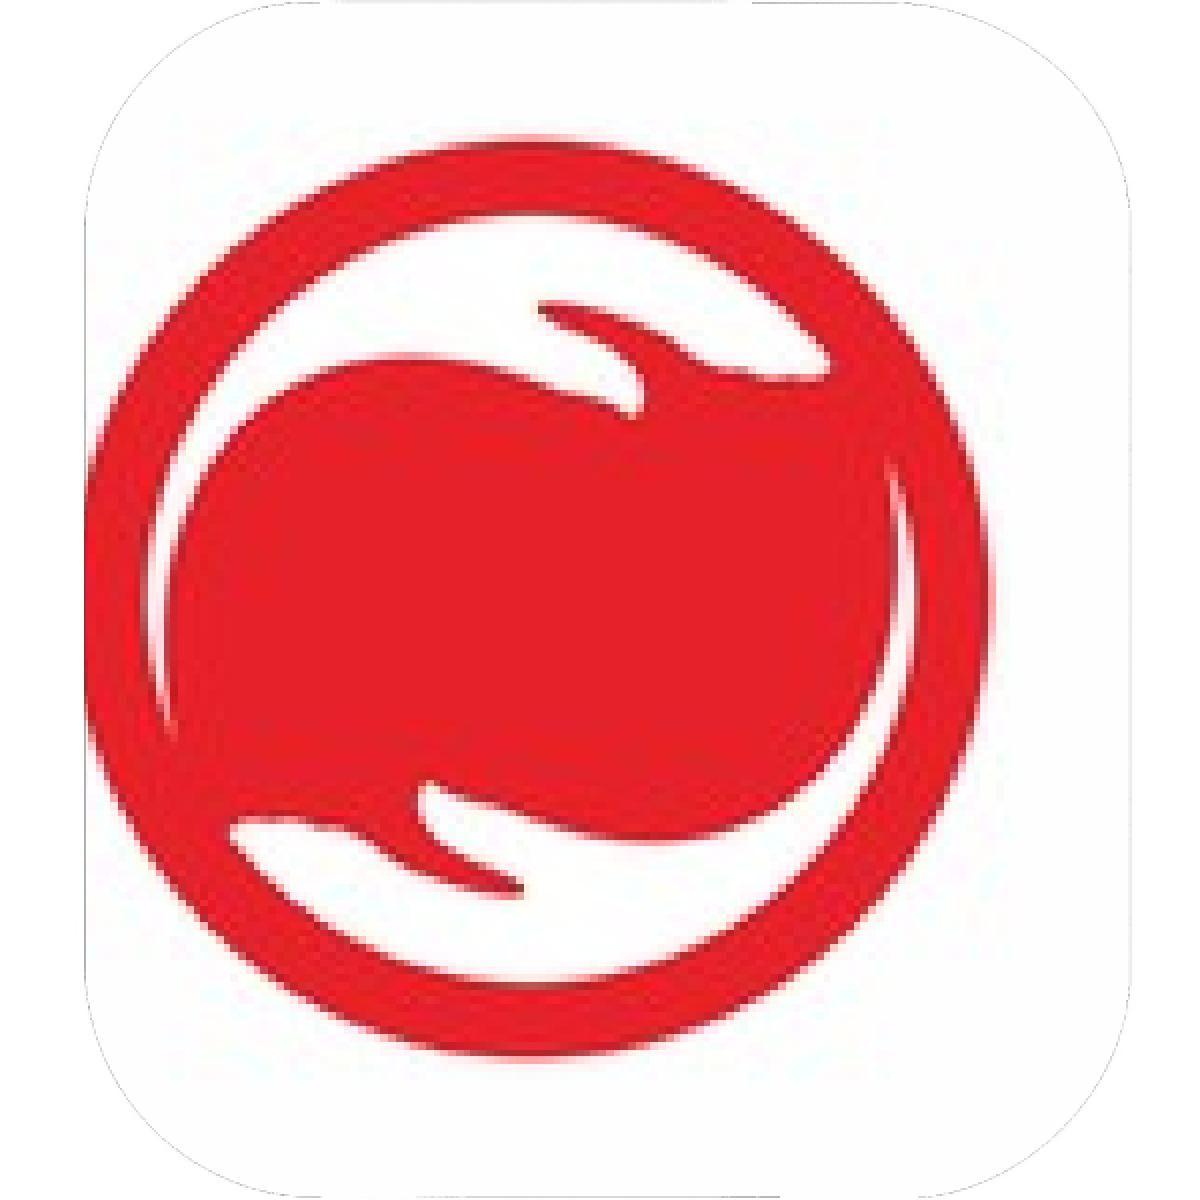 Two Hands On a Red Circle Logo - Designs